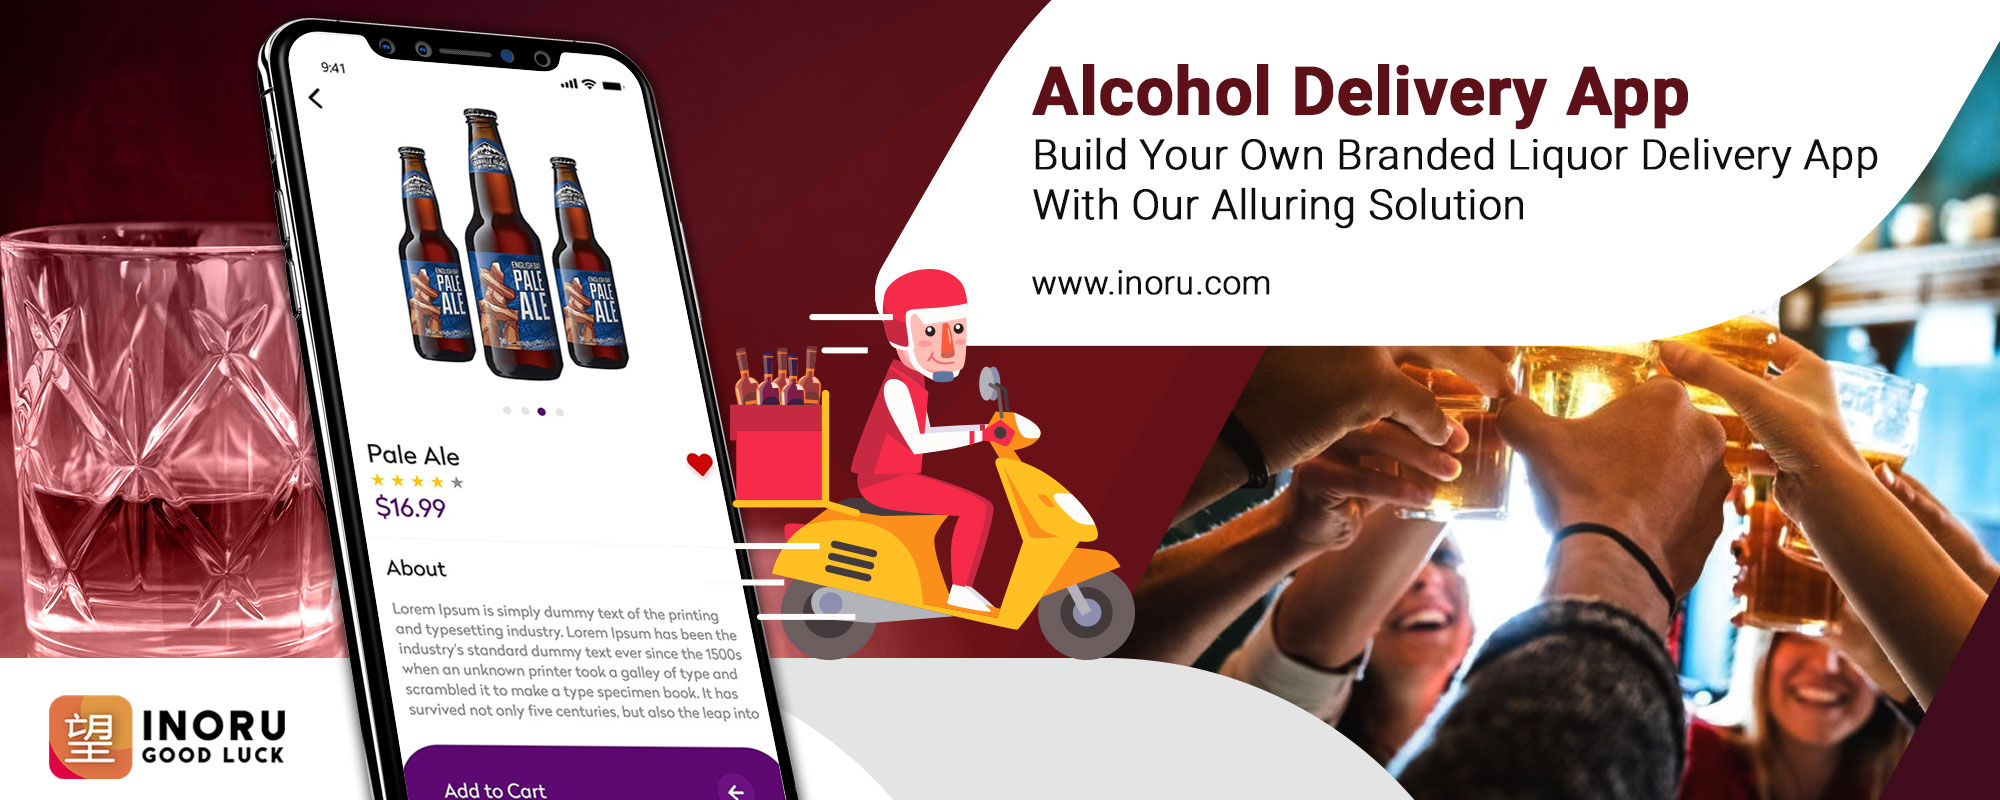 Alcohol Delivery app